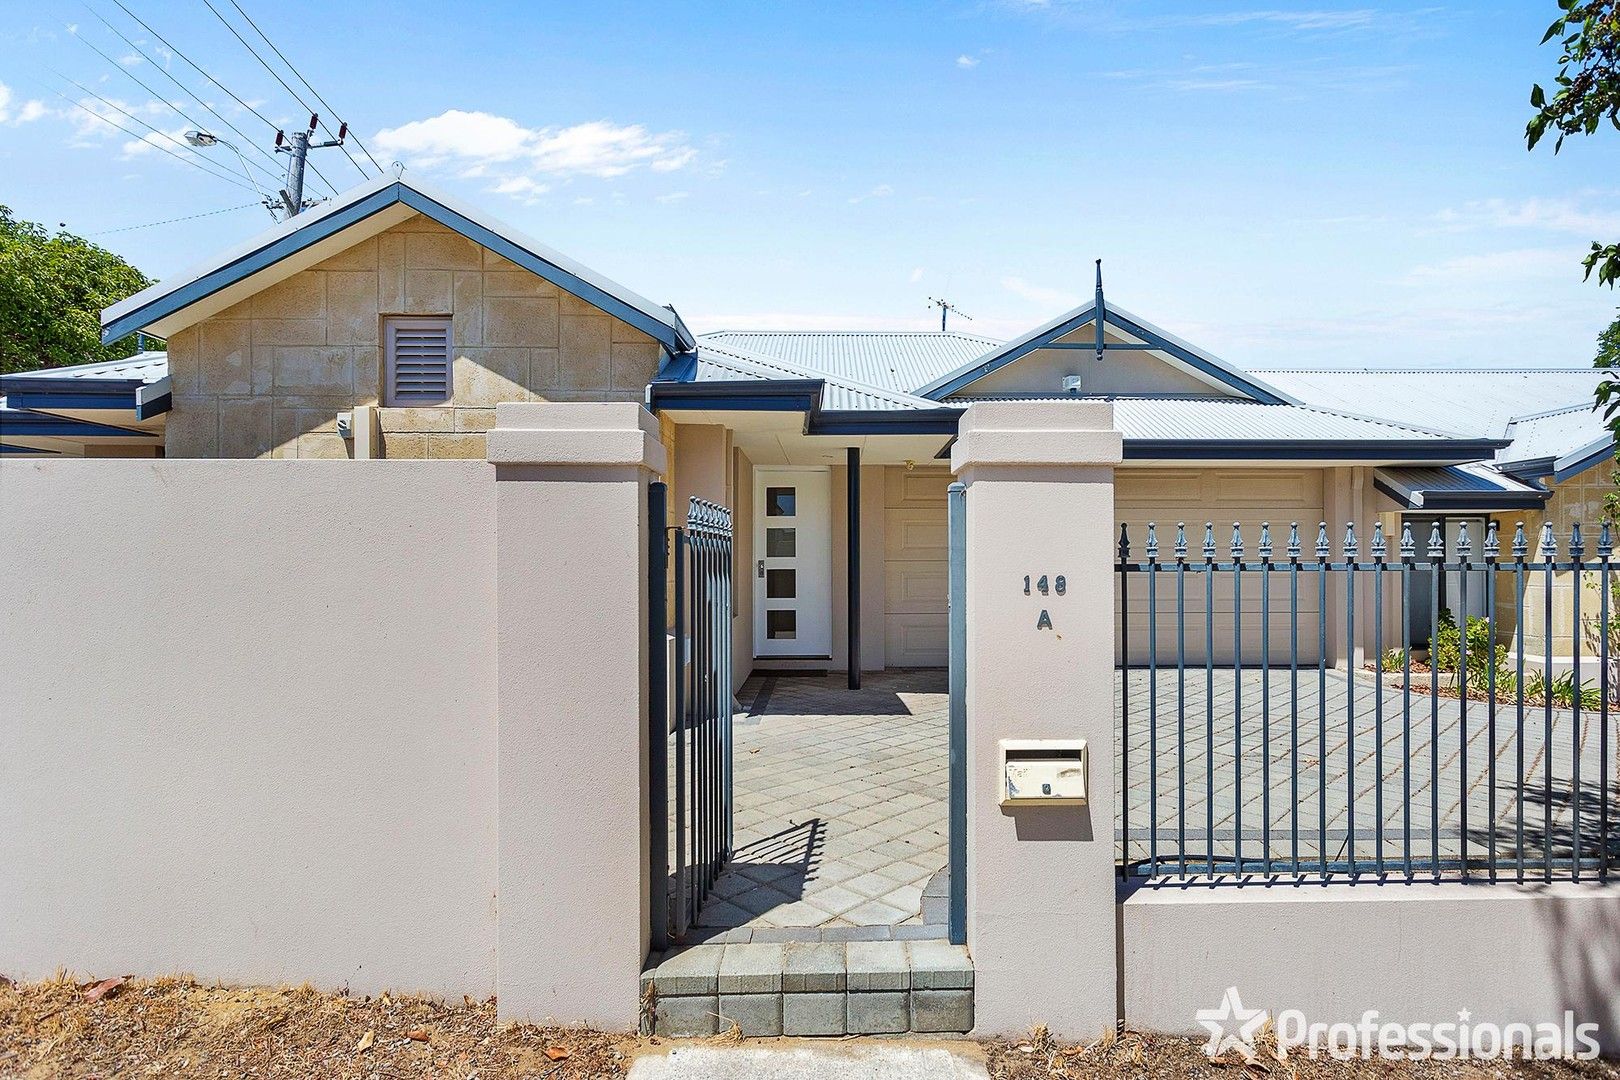 3 bedrooms Villa in 148A Huntriss Road DOUBLEVIEW WA, 6018